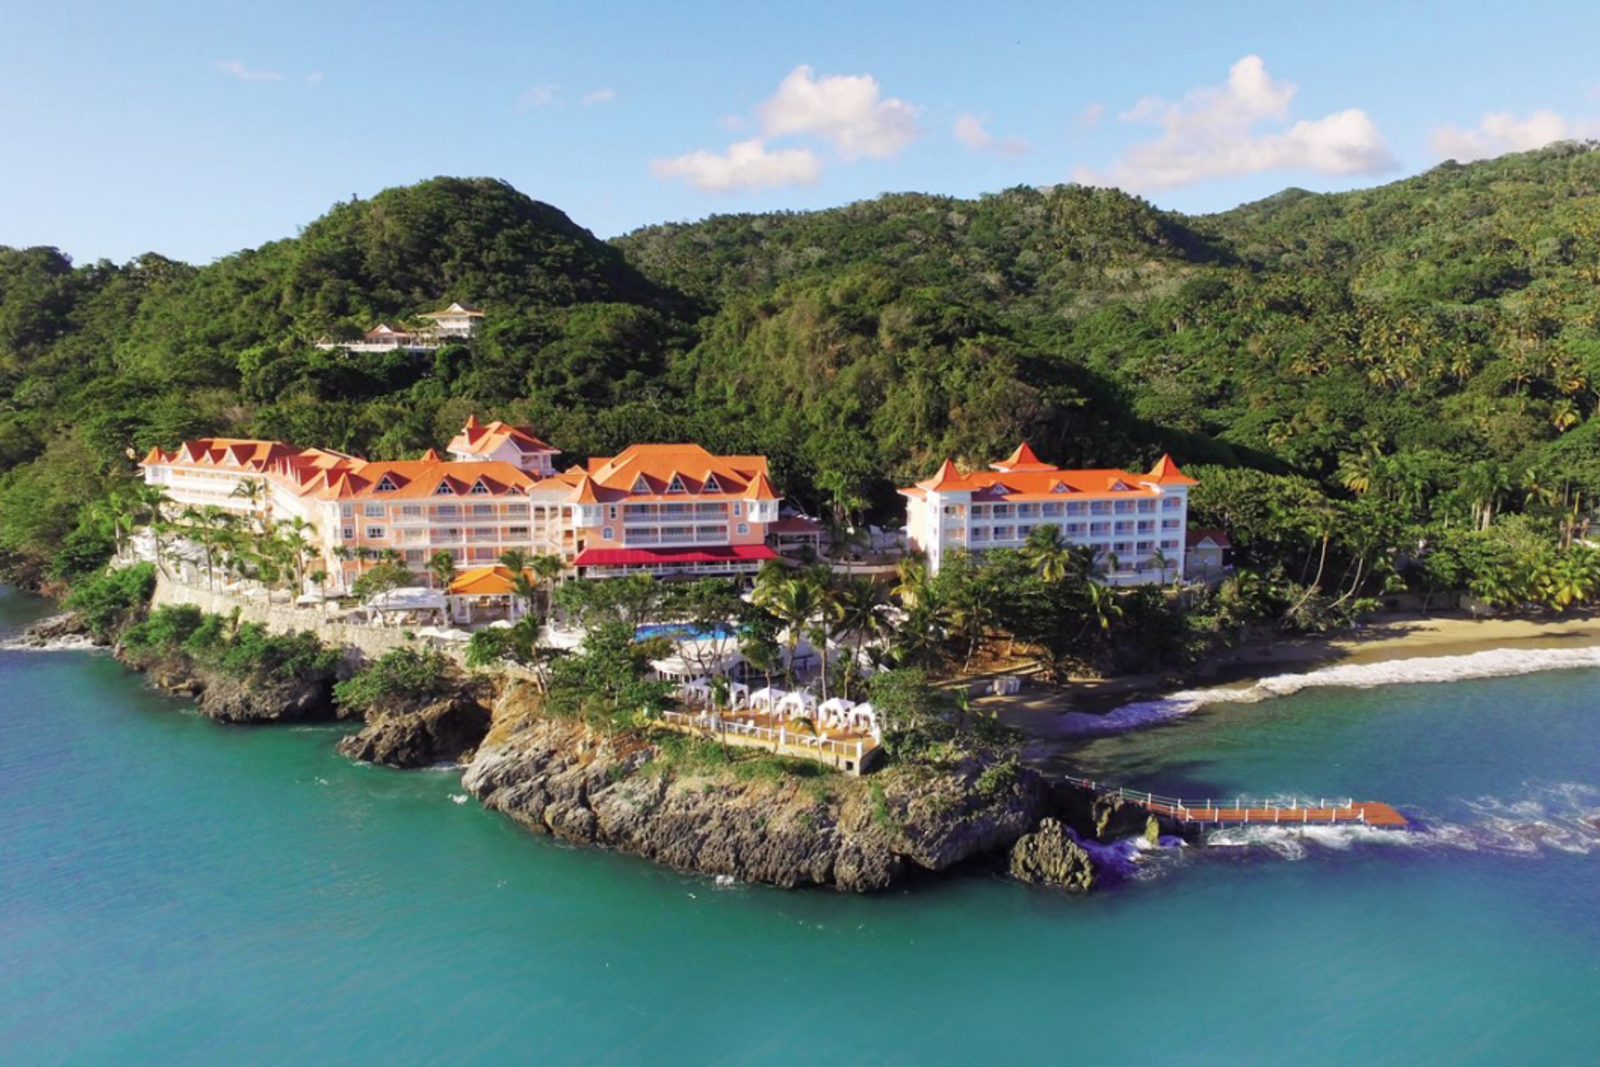 The adults-only all-inclusive Bahia Principe Luxury Samana resort in the Dominican Republic